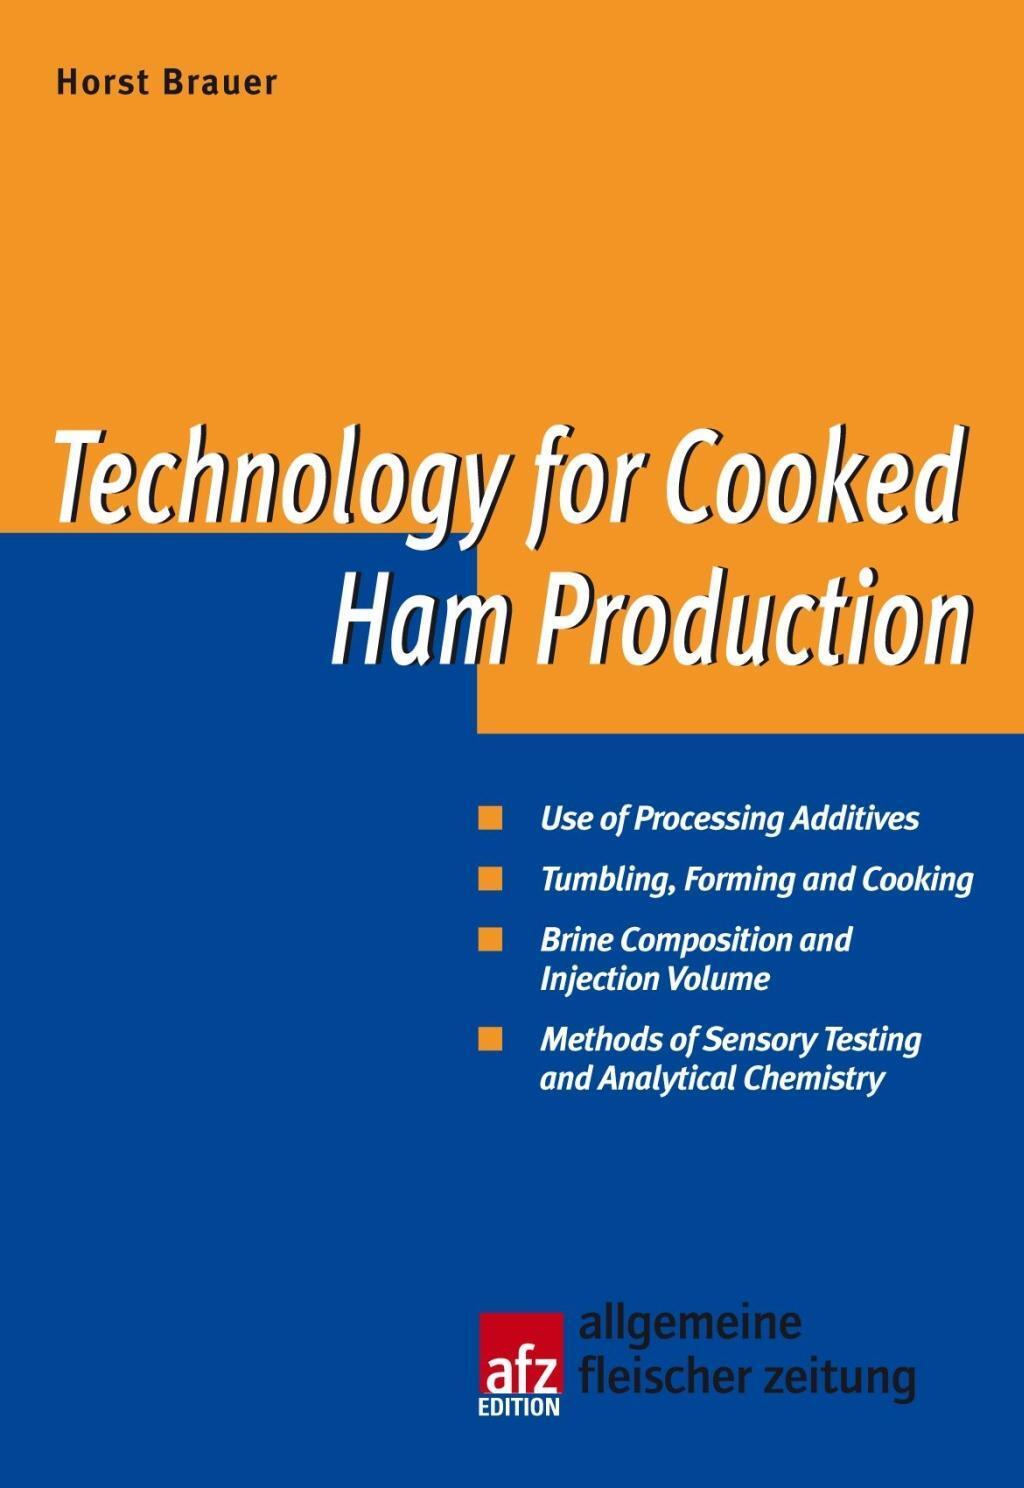 Cover: 9783866412088 | Technology for Cooked Ham Production | Edition afz | Horst Brauer